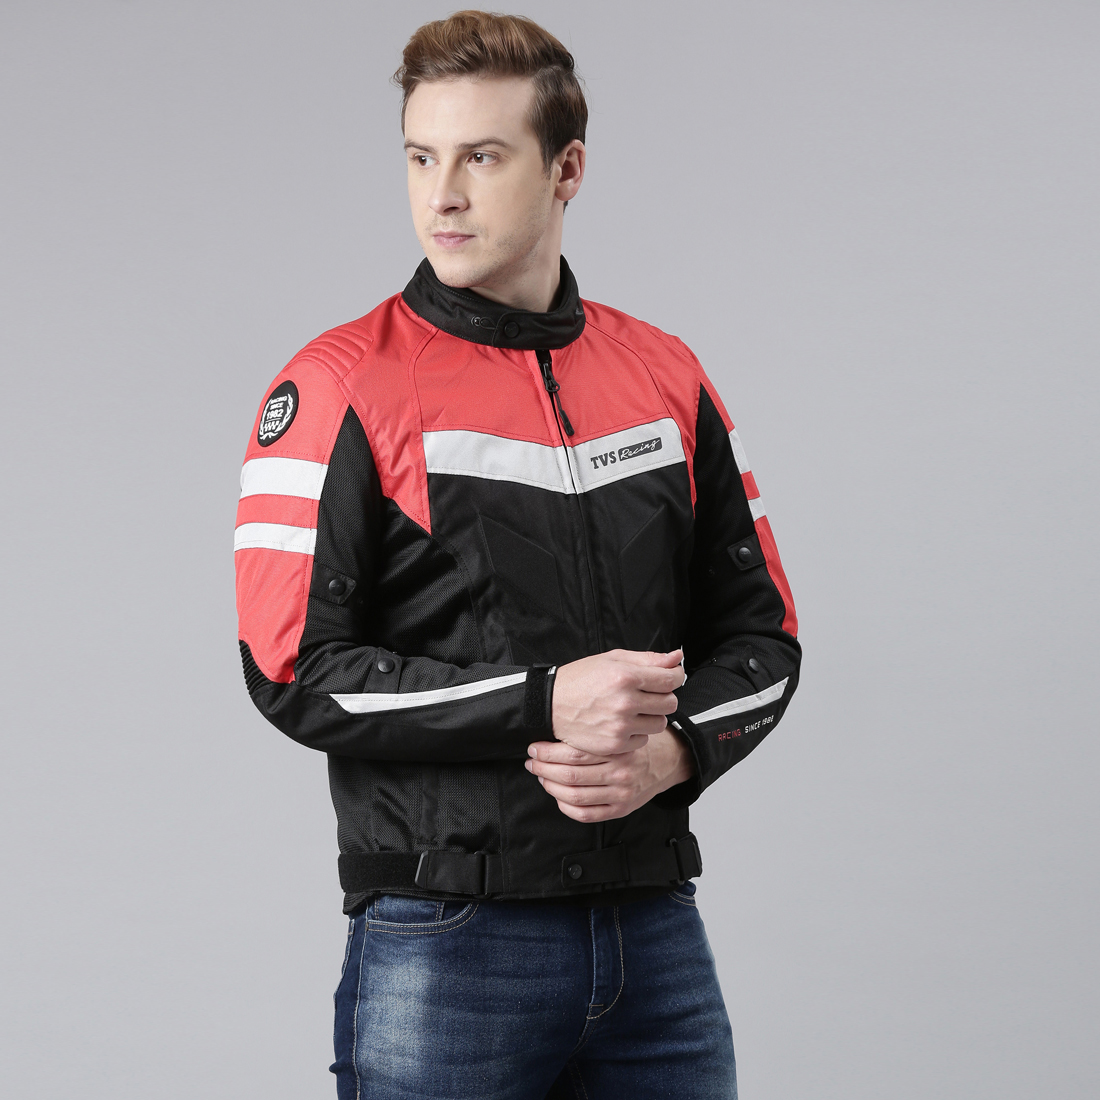  TVS Racing Aegis 3-Layer Riding Jacket for Men- All Weather Adaptability, CE Level 2 Armour Protection-Premium Bike Jackets for Bikers (Red)